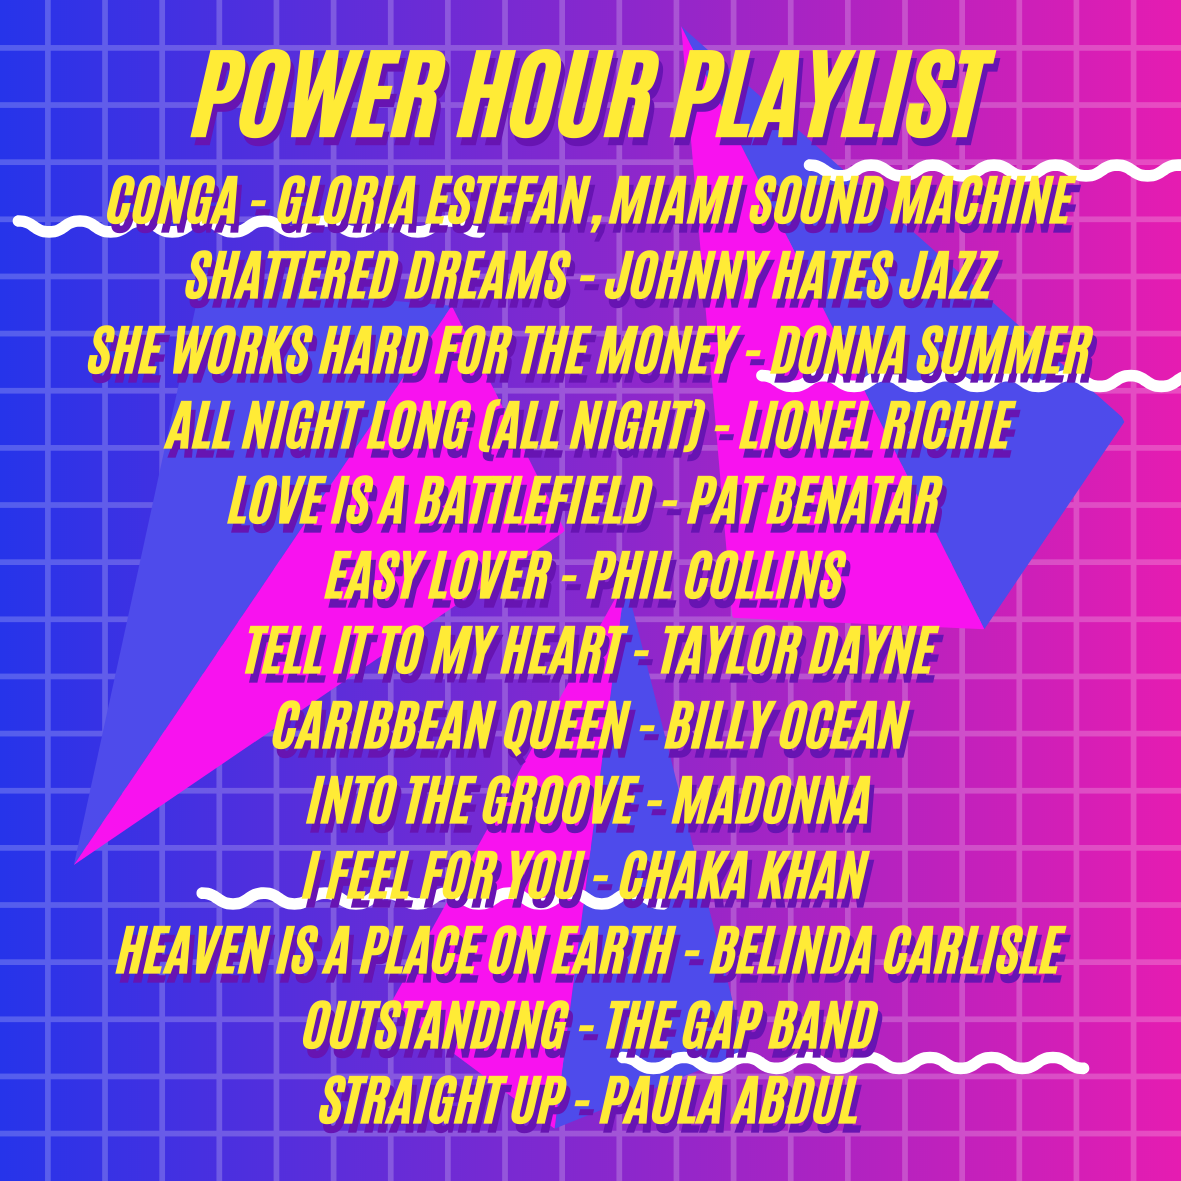 Power Hour Playlist: 1980s Edition with a list of great songs from the '80s.